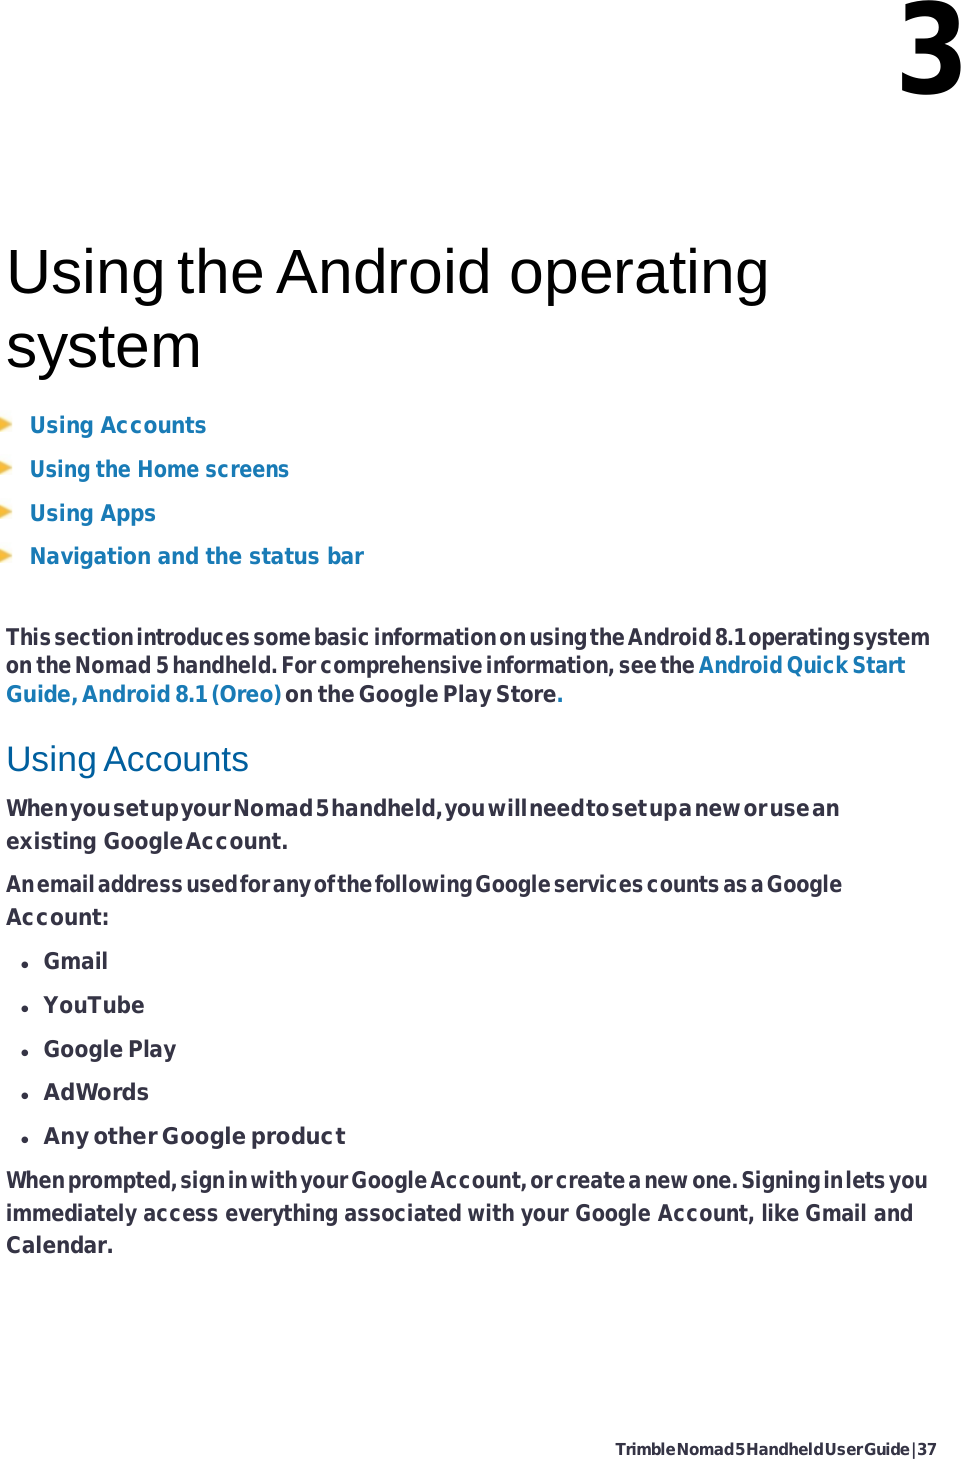 Trimble Nomad 5 Handheld User Guide | 37   3    Using the Android operating system Using Accounts Using the Home screens Using Apps Navigation and the status bar  This section introduces some basic information on using the Android 8.1 operating system on the Nomad 5 handheld. For comprehensive information, see the Android Quick Start Guide, Android 8.1 (Oreo) on the Google Play Store.  Using Accounts When you set up your Nomad 5 handheld, you will need to set up a new or use an existing Google Account. An email address used for any of the following Google services counts as a Google Account:  Gmail  YouTube  Google Play  AdWords  Any other Google product When prompted, sign in with your Google Account, or create a new one. Signing in lets you immediately access everything associated with your Google Account, like Gmail and Calendar. 